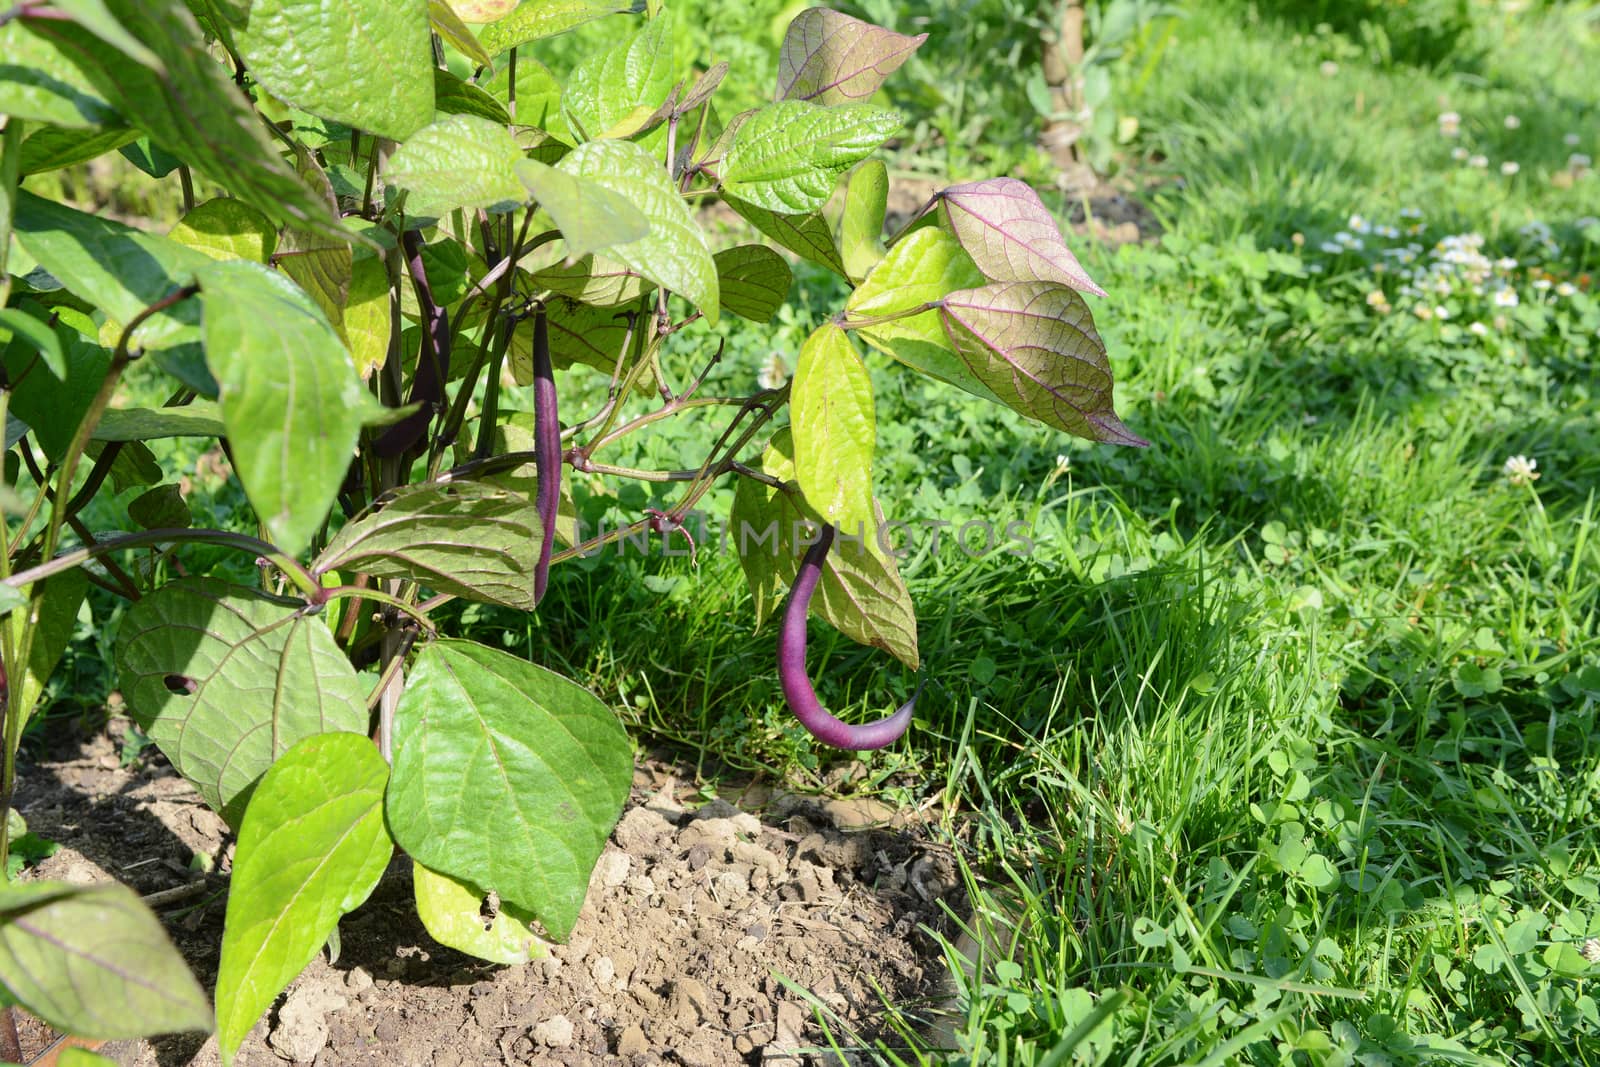 Purple bean hangs from dwarf French bean plant in a sunny allotment garden